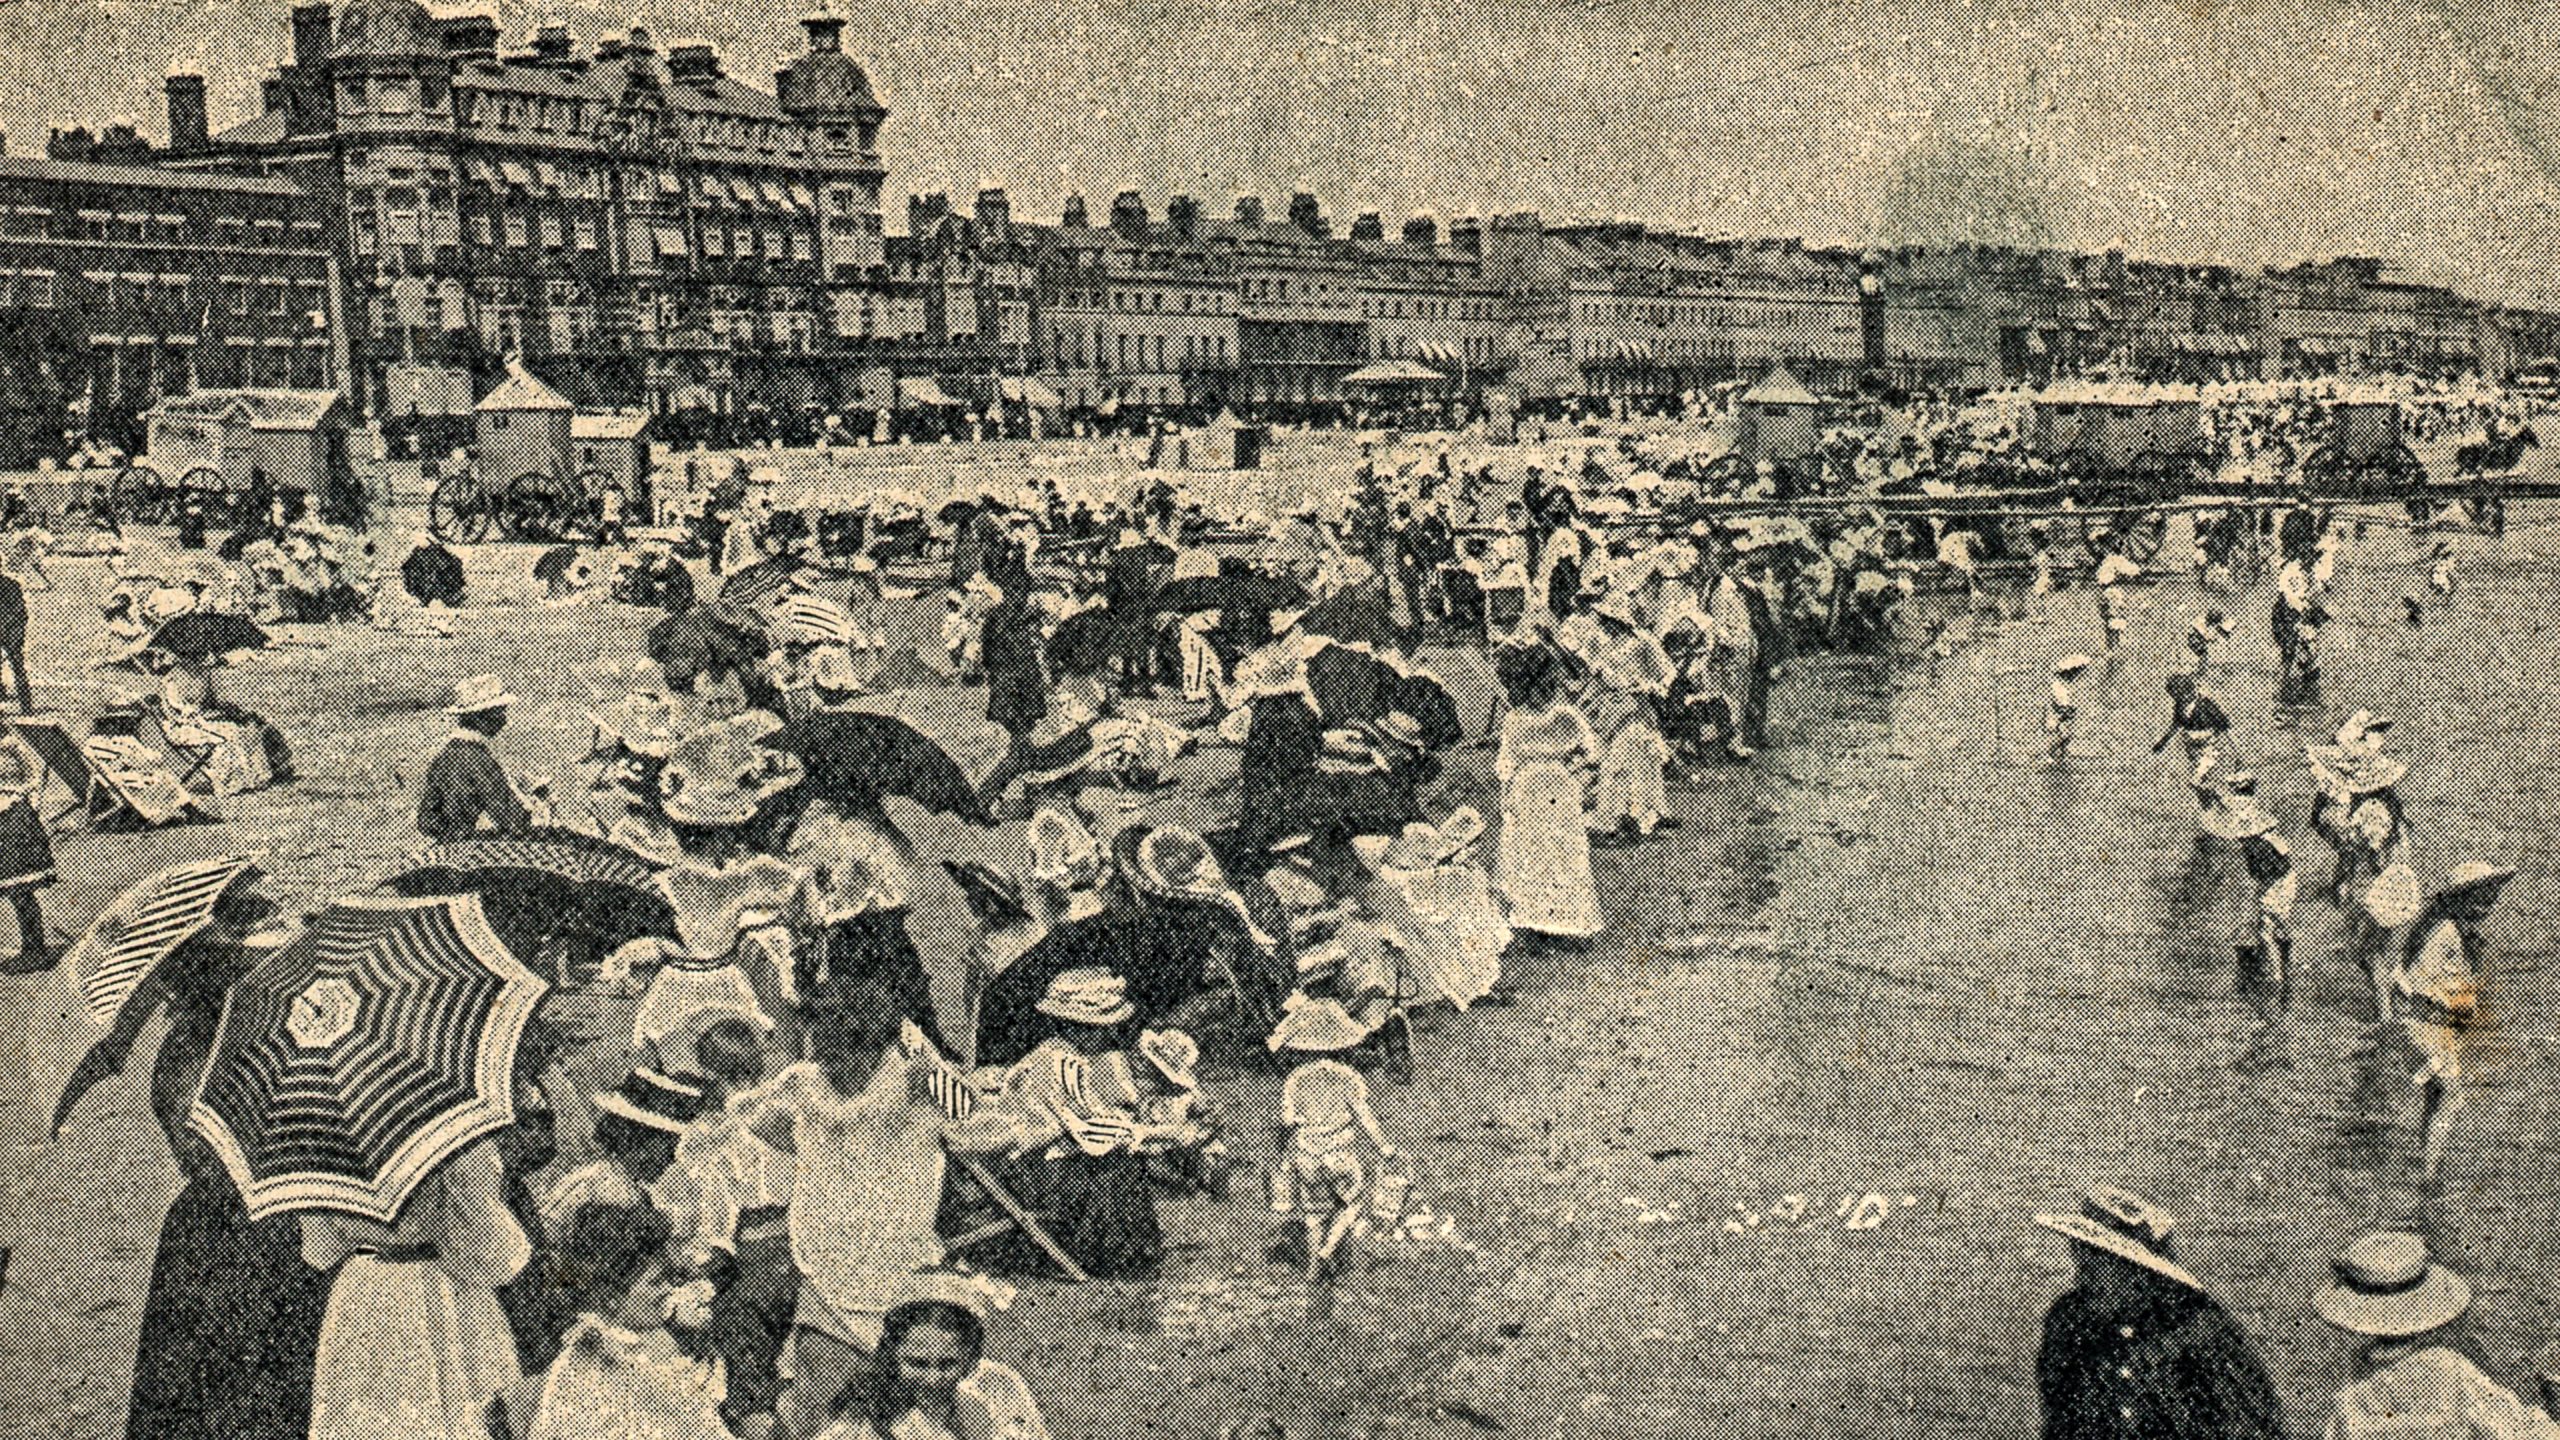 black and white postcard with image of packed beach with people in early twentieth century fashion, many hold parasols